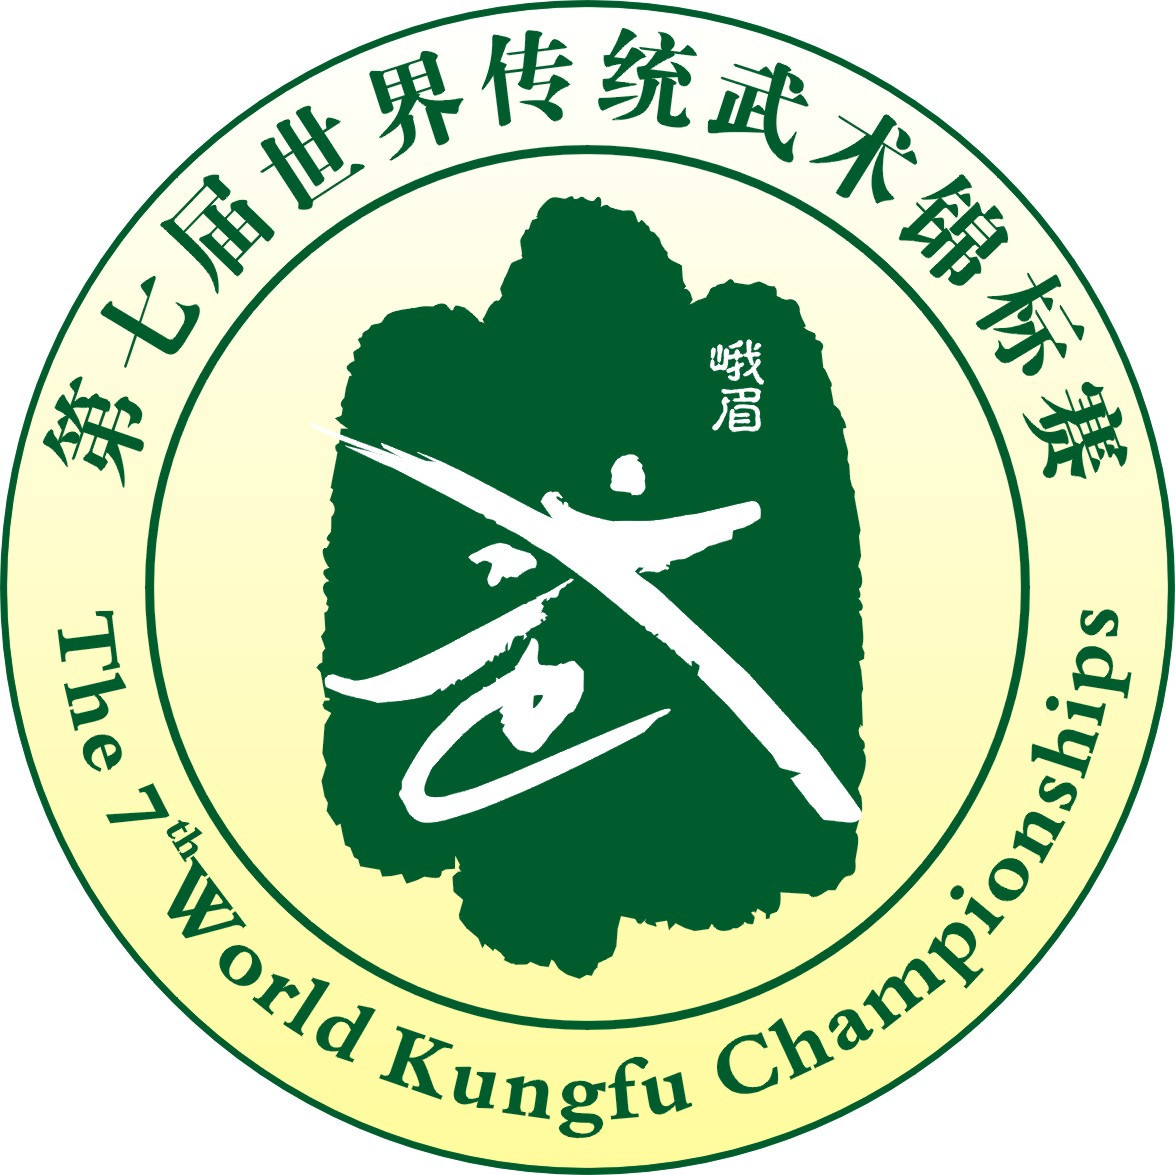 Logo and mascot unveiled for 2017 World Kung-fu Championships